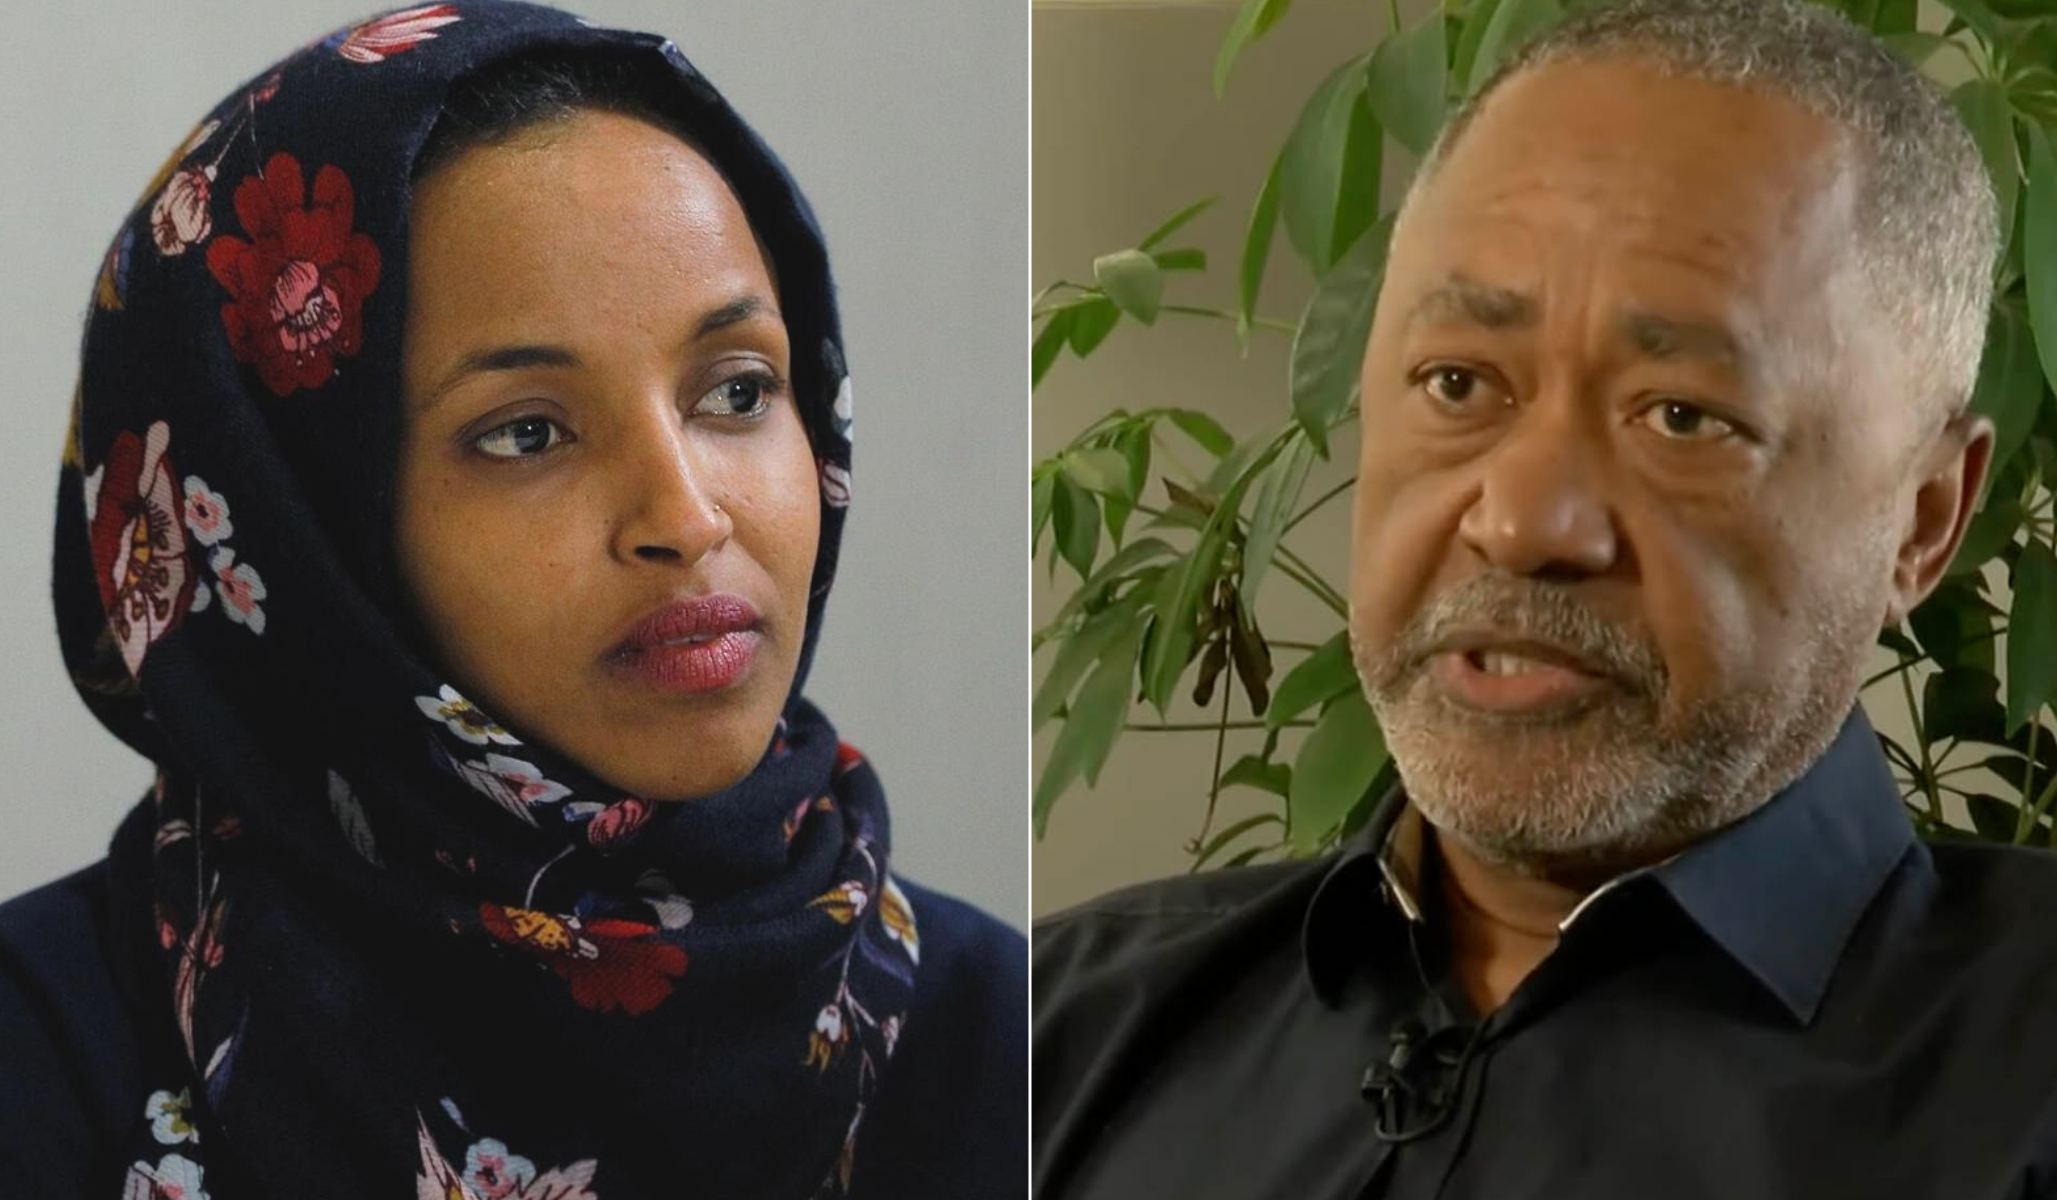 Don Samuels Concedes to 'Squad' Member Ilhan Omar in Minnesota House Primary